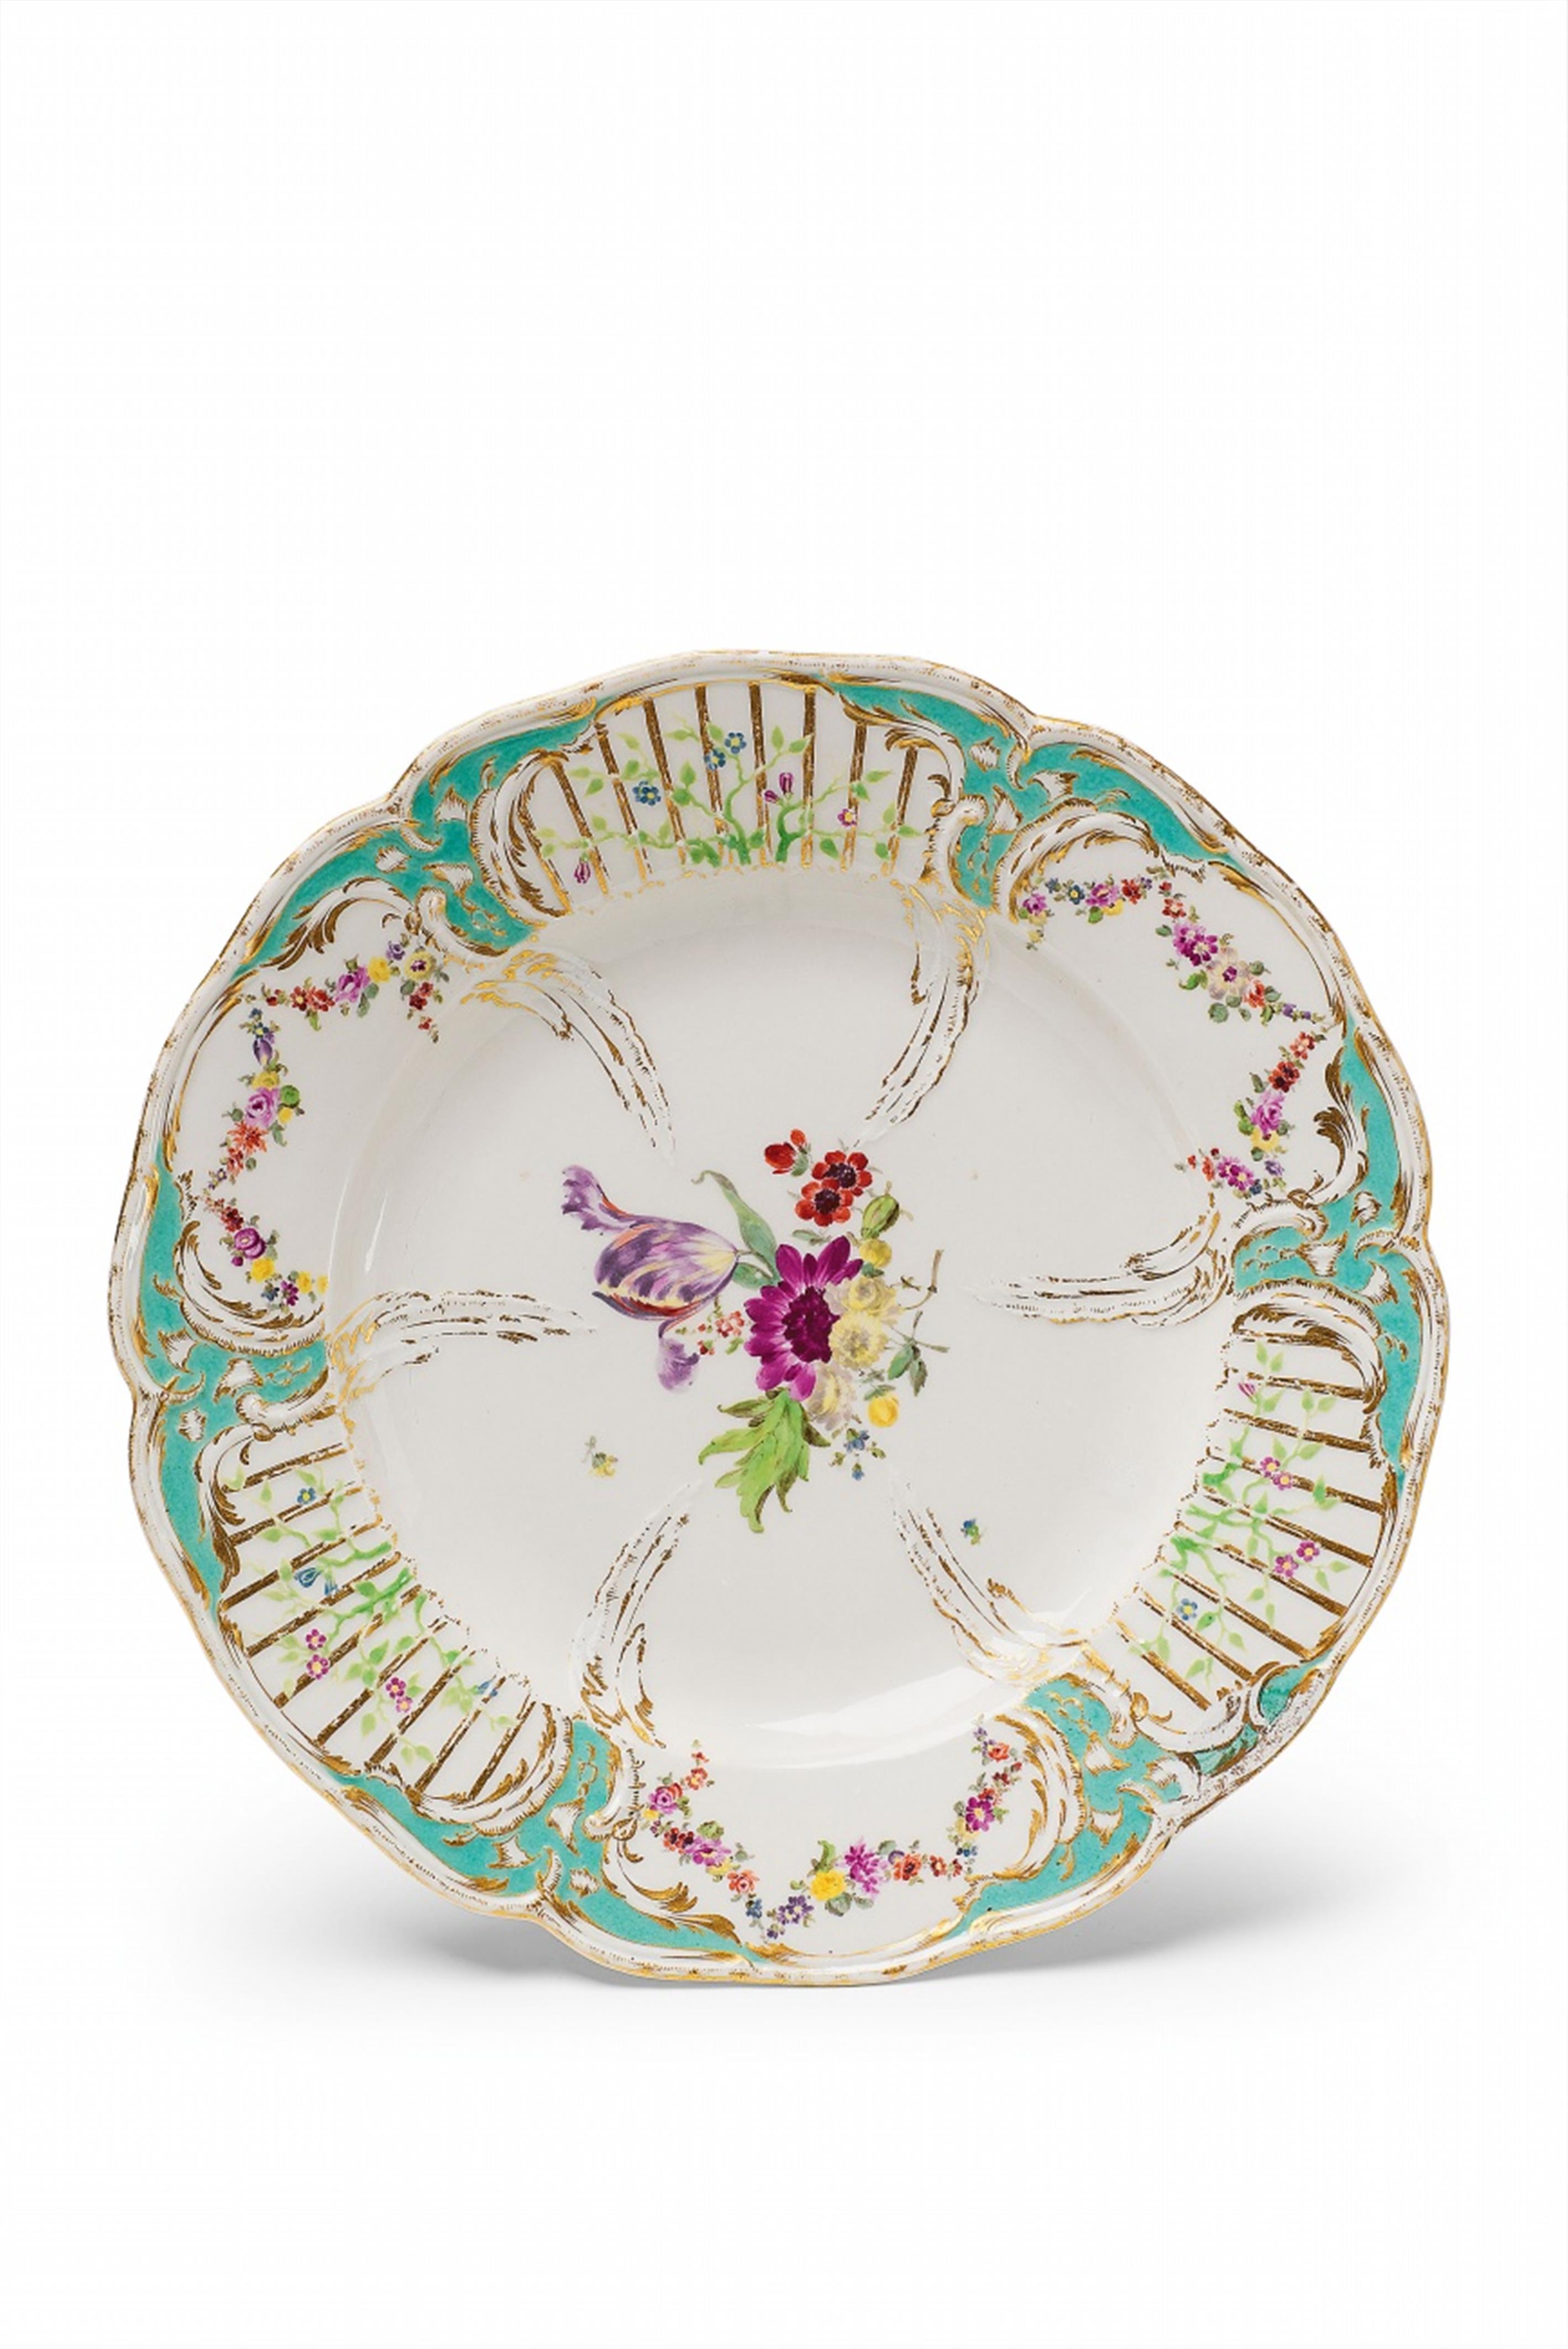 A plate from the green table service, the "2. Potsdam´sche" service, made for Frederick II - image-1